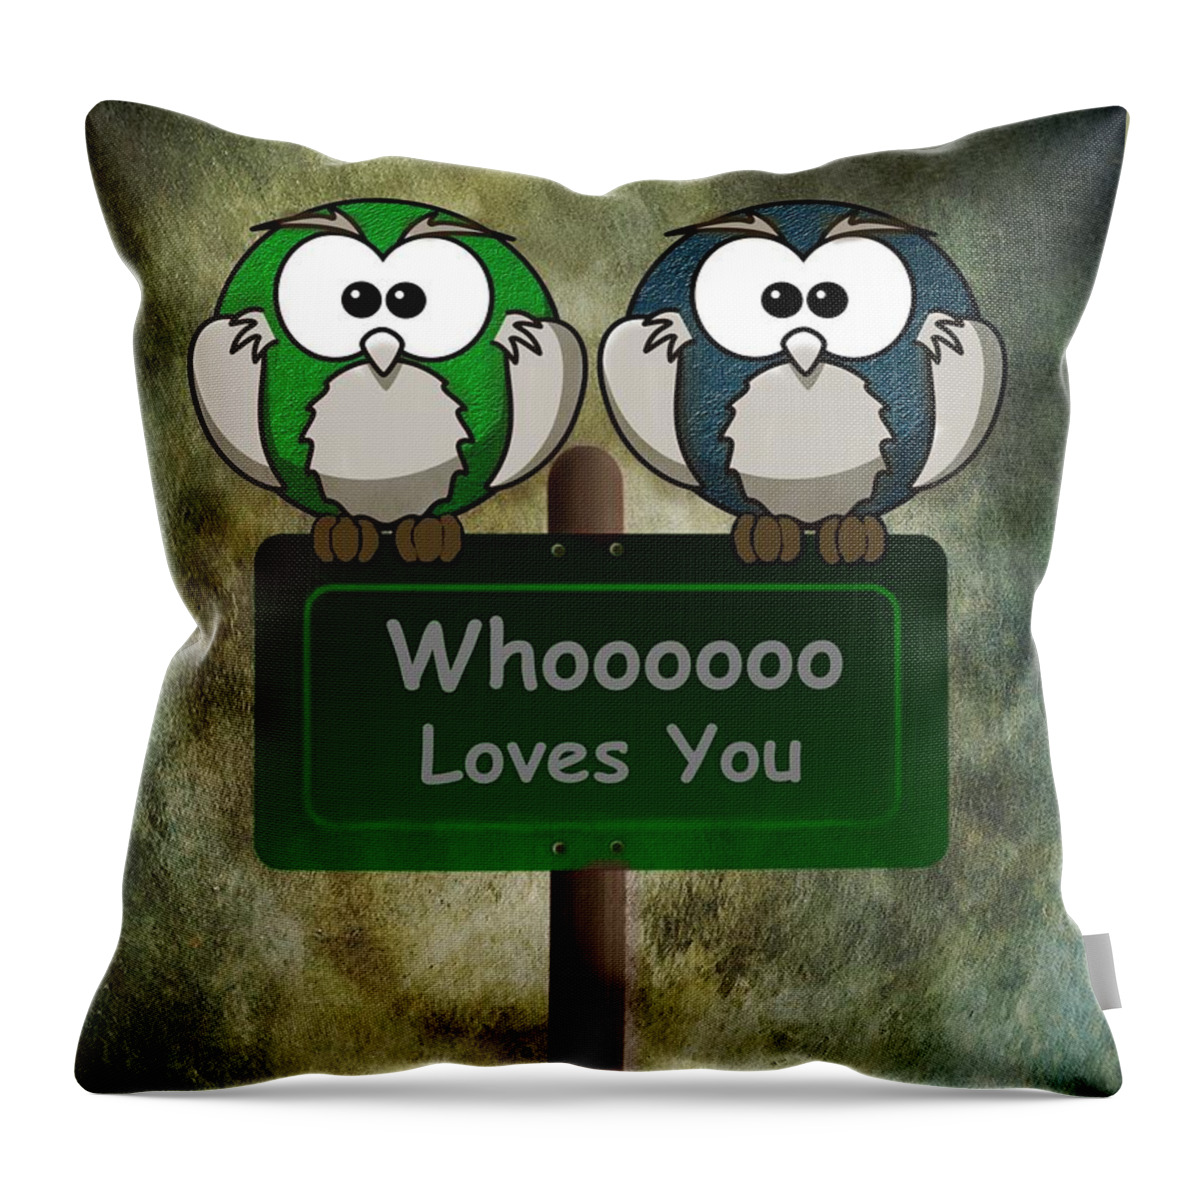 Love Throw Pillow featuring the digital art Whoooo Loves You by David Dehner